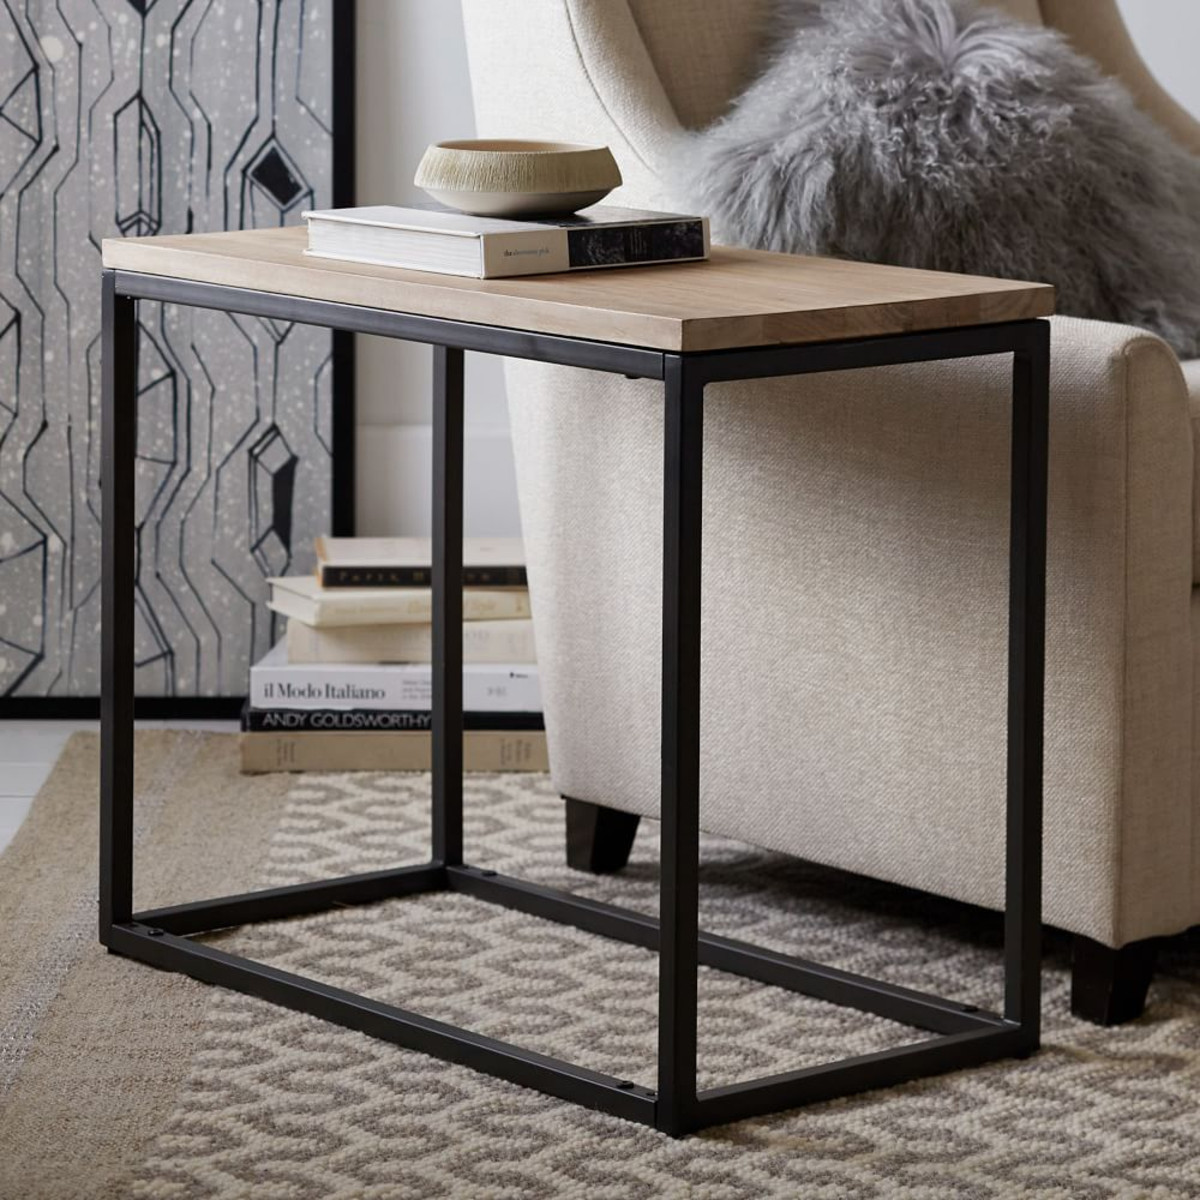 very narrow coffee table design ideas mini style accent the delightful lawn dolan lighting ikea kids storage metal dining room chairs crystal lamps inch nightstand union jack